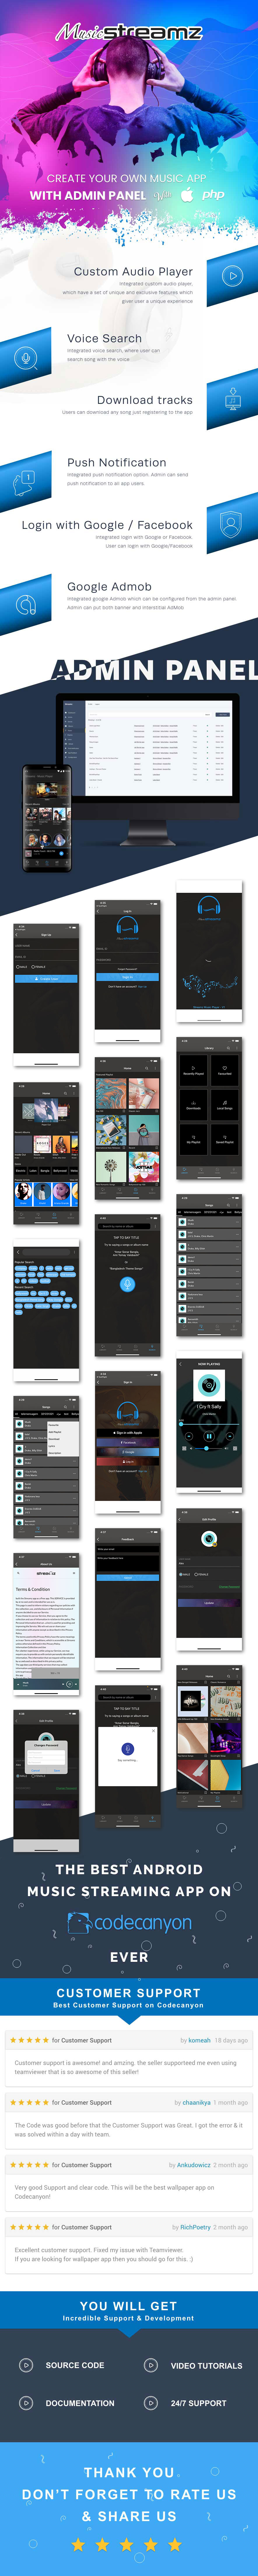 Streamz - A music streaming iOS app with admin panel - 6